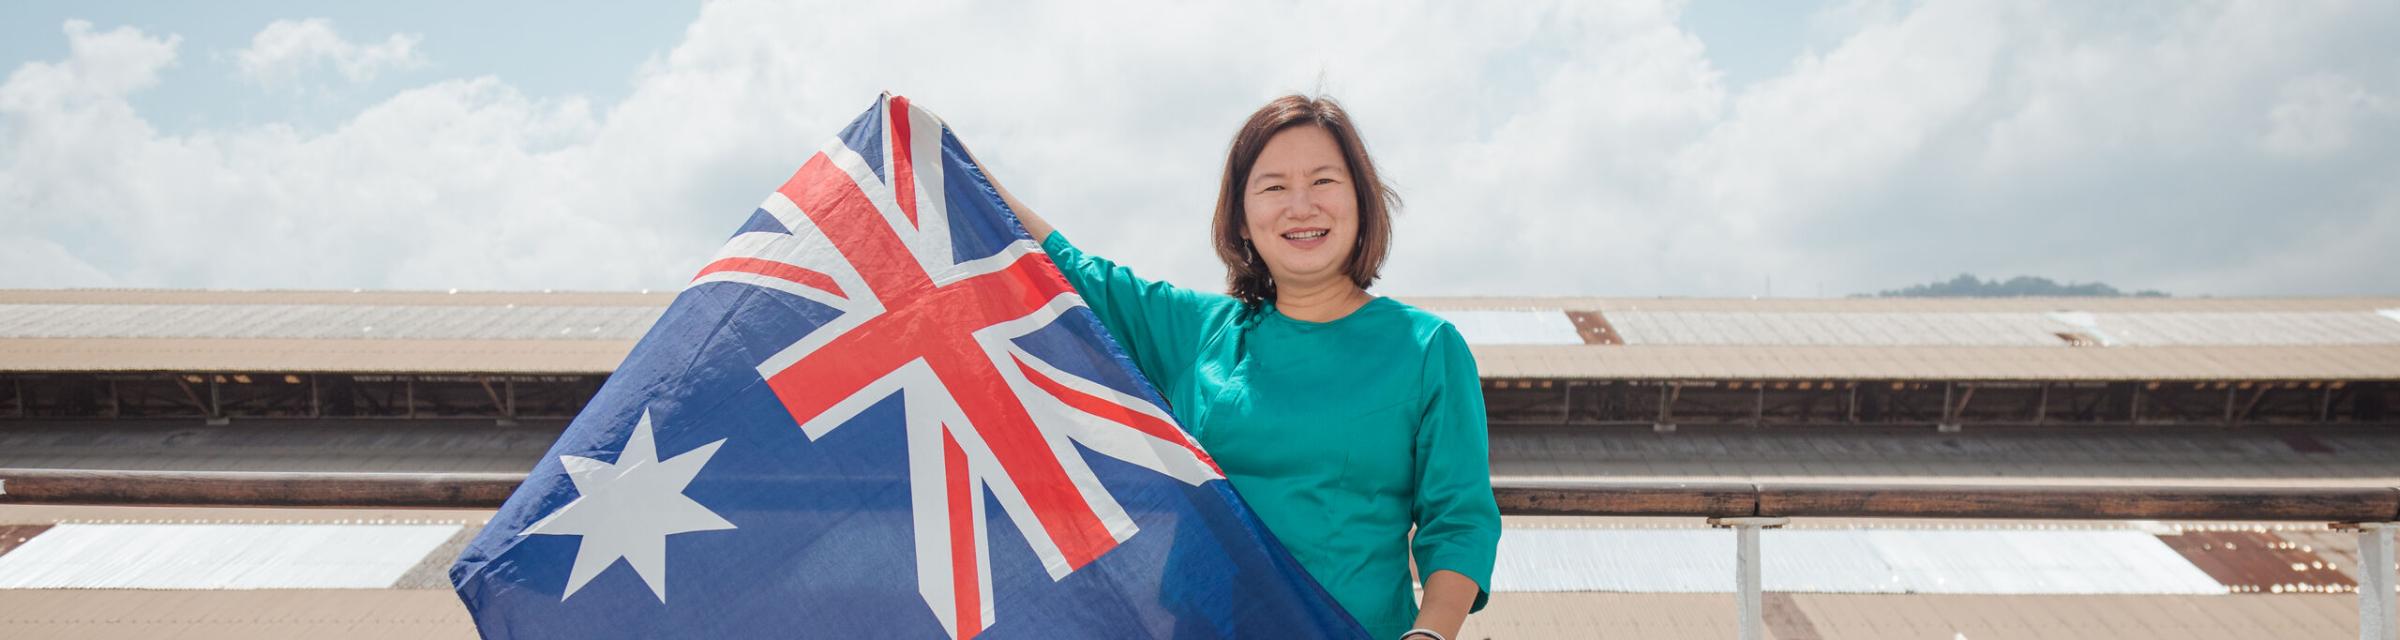 OM Ships :: Frances Win (Australia) shows her Australian flag while wearing the Burmese traditional costume as she grew up in Myanmar (previous Burma) but moved with her family to Australia when she was in he 20s and considers herself Australian.